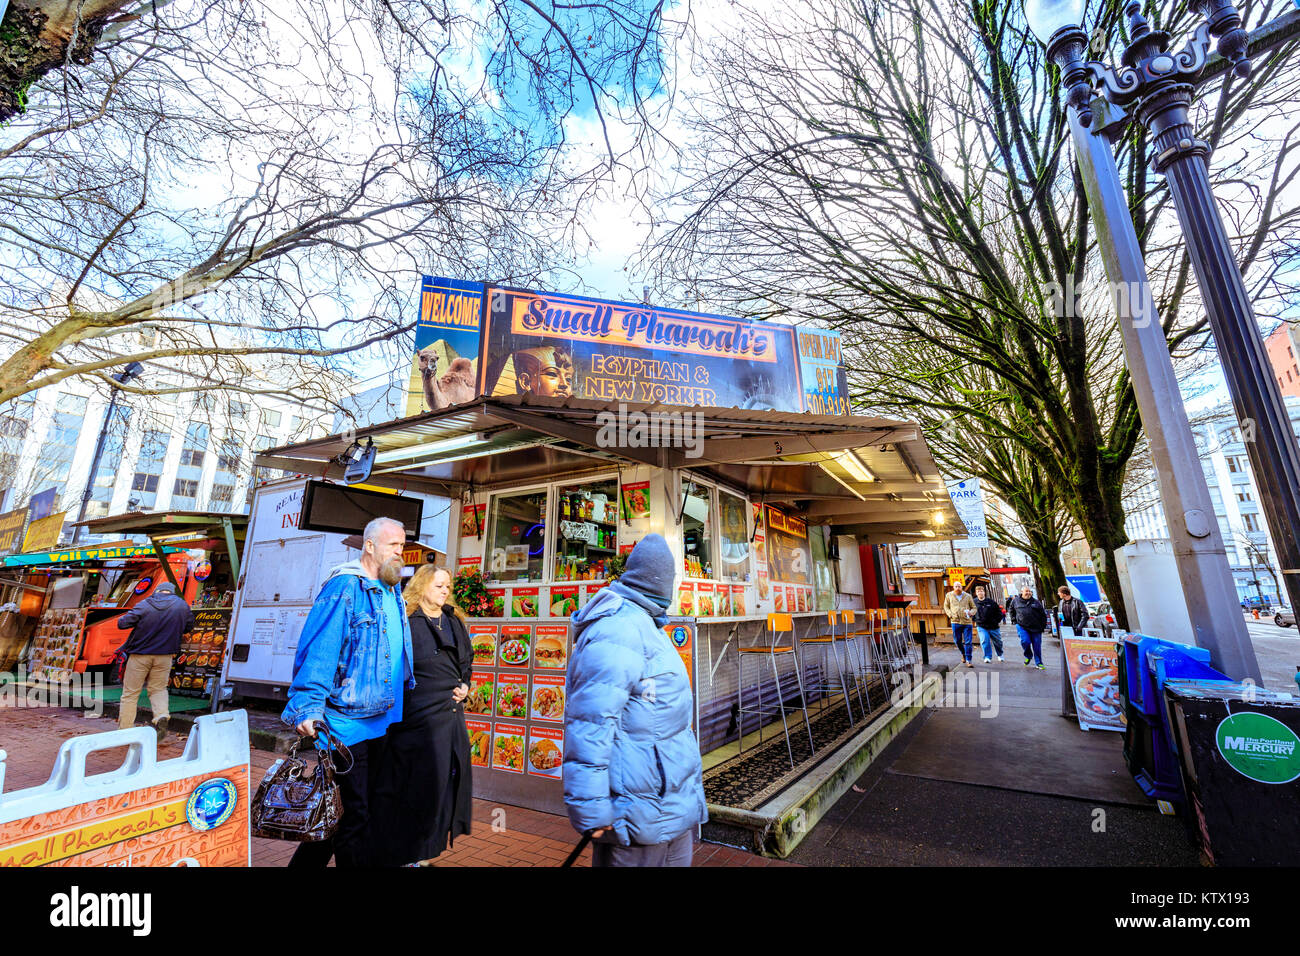 Portland, United States - Dec 21, 2017 : Food trucks and carts in downtown PDX offer lunch and other meails for inexpensive prices near major office b Stock Photo